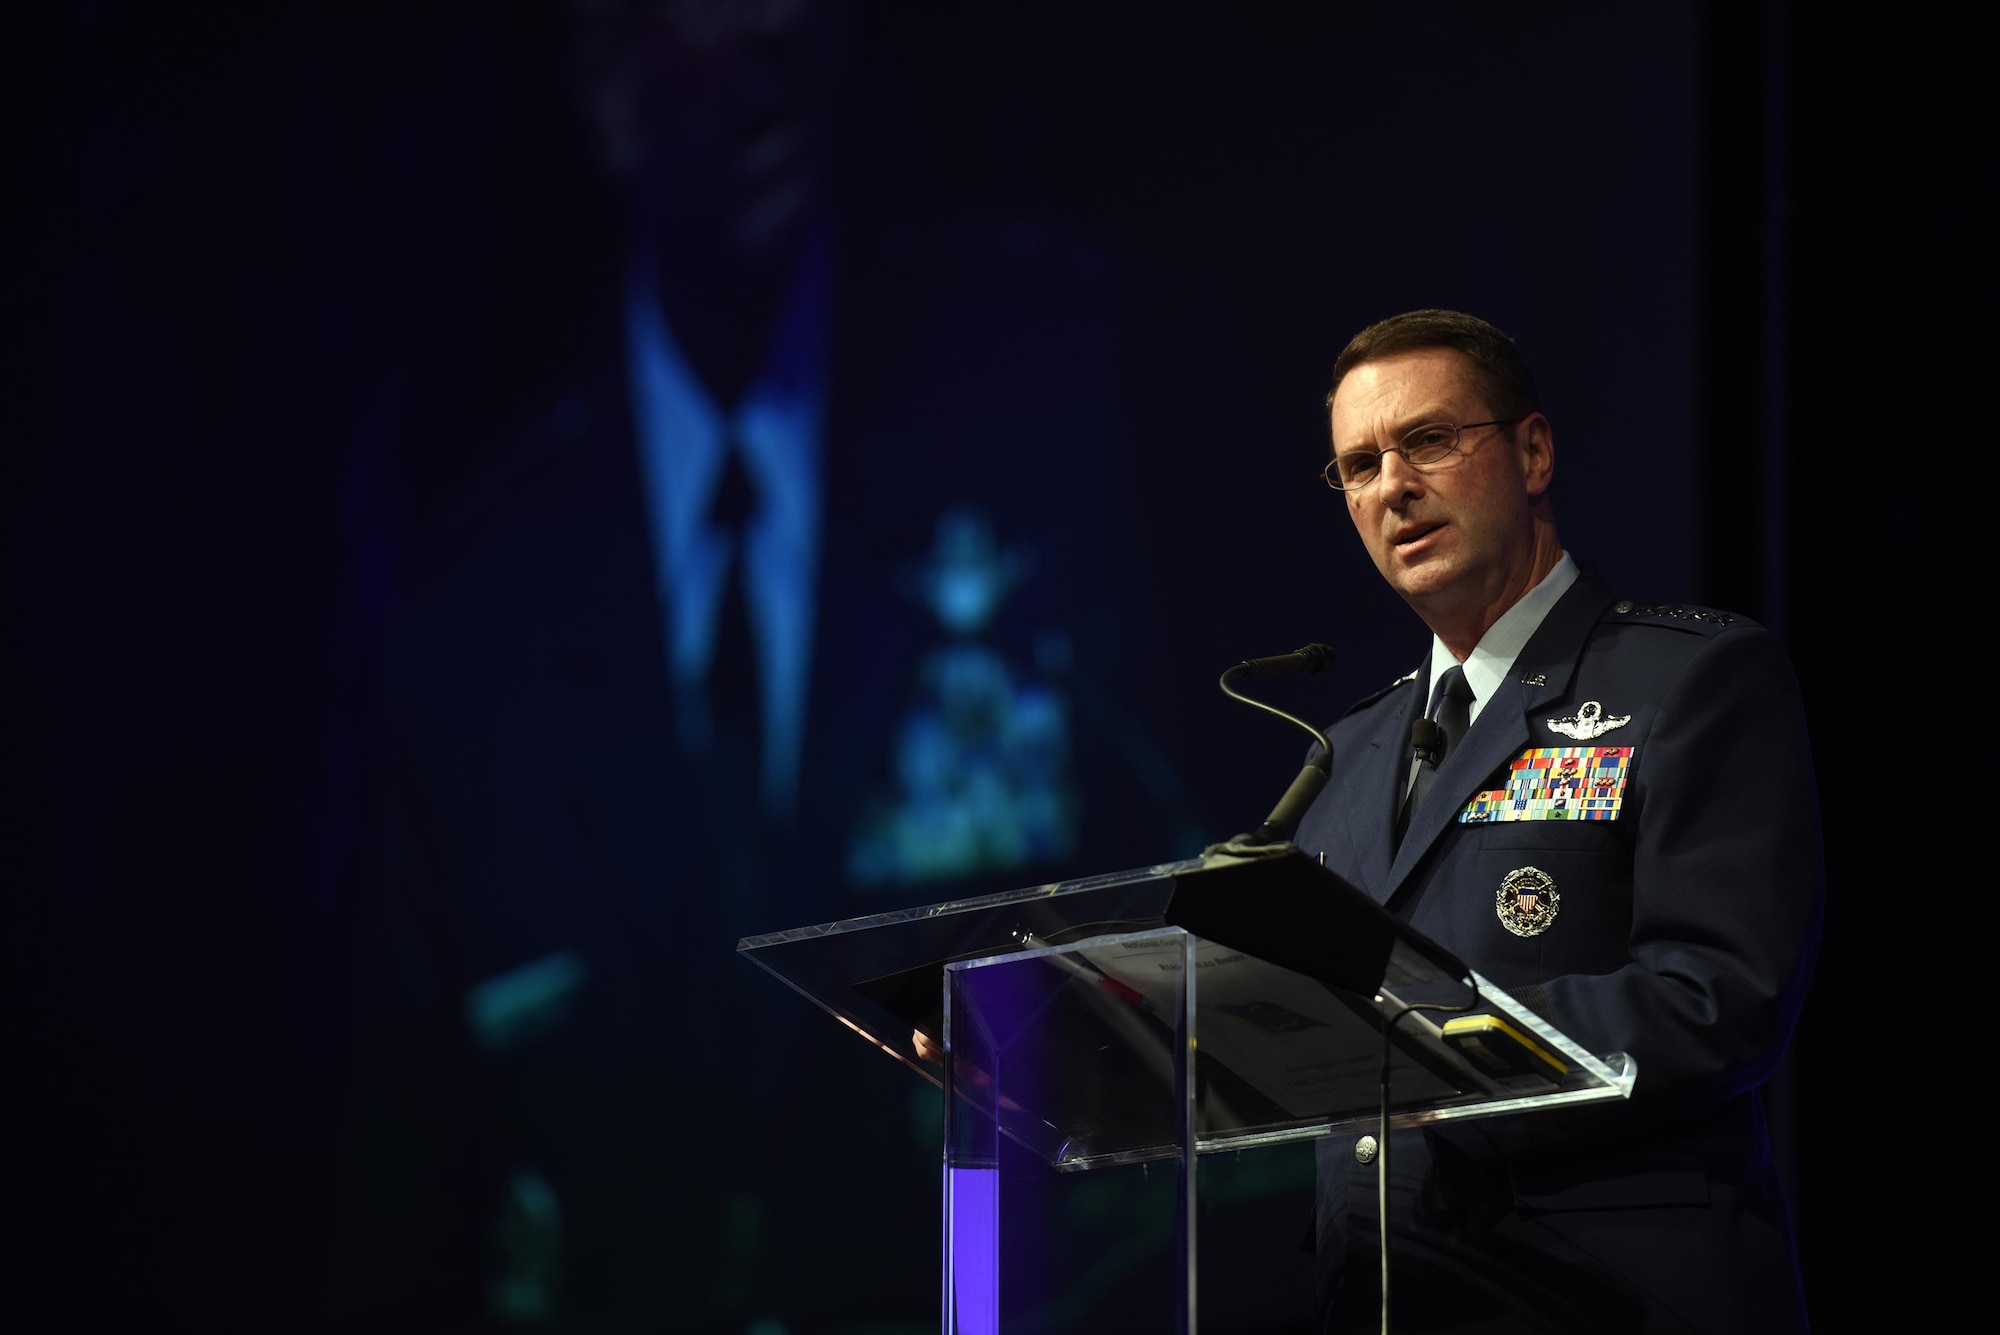 Gen. Joseph Lengyel, chief of National Guard Bureau, addresses an audience at the North American International Cyber Summit 2016 in Detroit, Oct. 17, 2016. Hosted by Michigan Gov. Rick Snyder, the summit was a collaborative effort with the National Governors Association, the Department of Homeland Security, private industry, educators, students and local partners. (U. S. National Guard photo/Sgt. 1st Class Jim Greenhill)